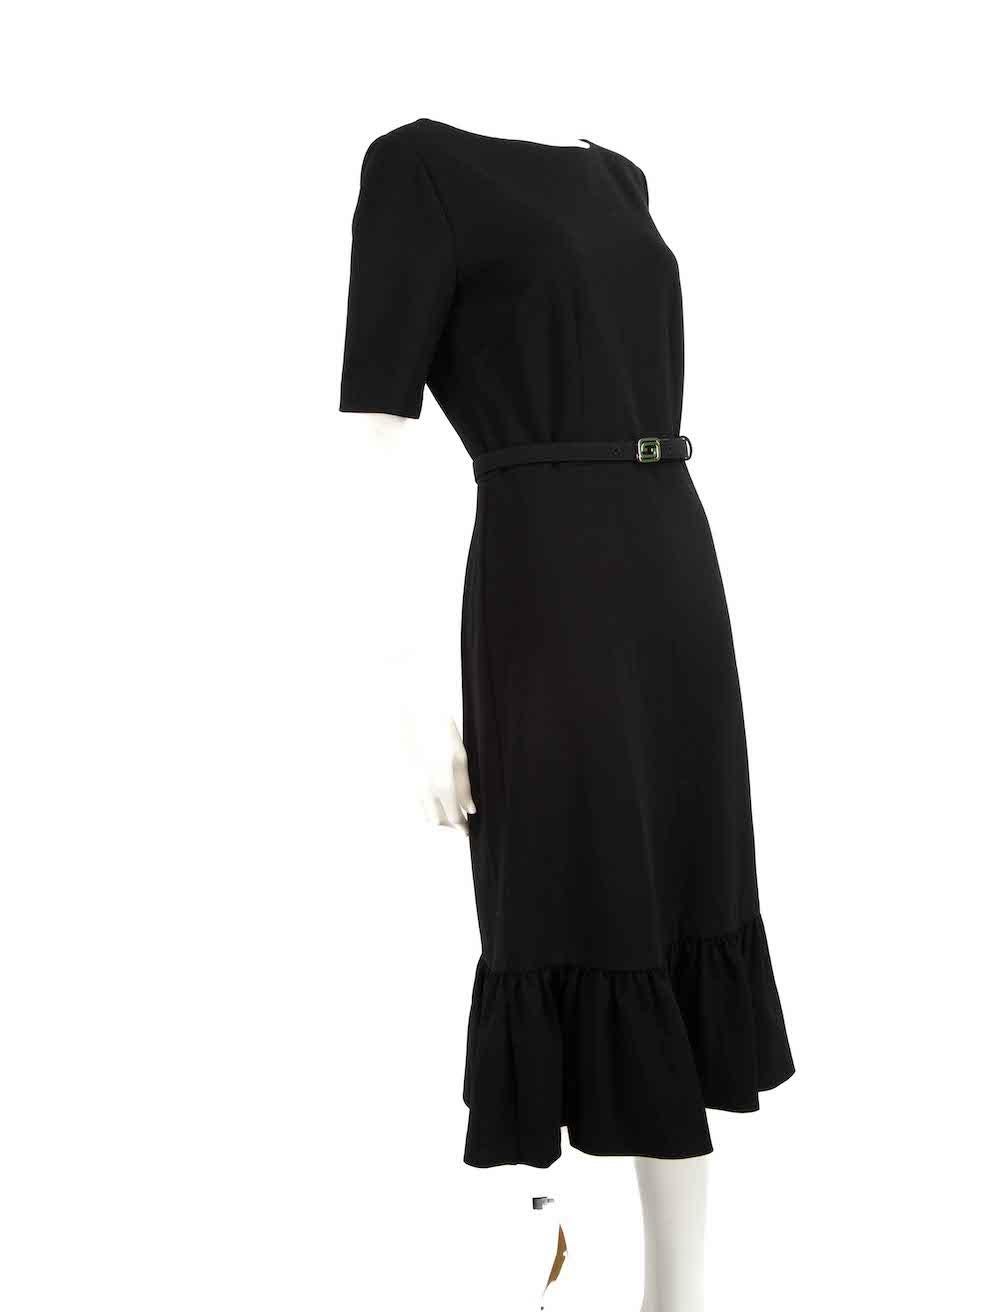 CONDITION is Very good. Minimal wear to dress is evident. Minimal wear to buckle hardware where tarnishing and scratches is seen on this used Gucci designer resale item.
 
 Details
 Black
 Viscose
 Dress
 GG Logo belt
 Short sleeves
 Round neck
